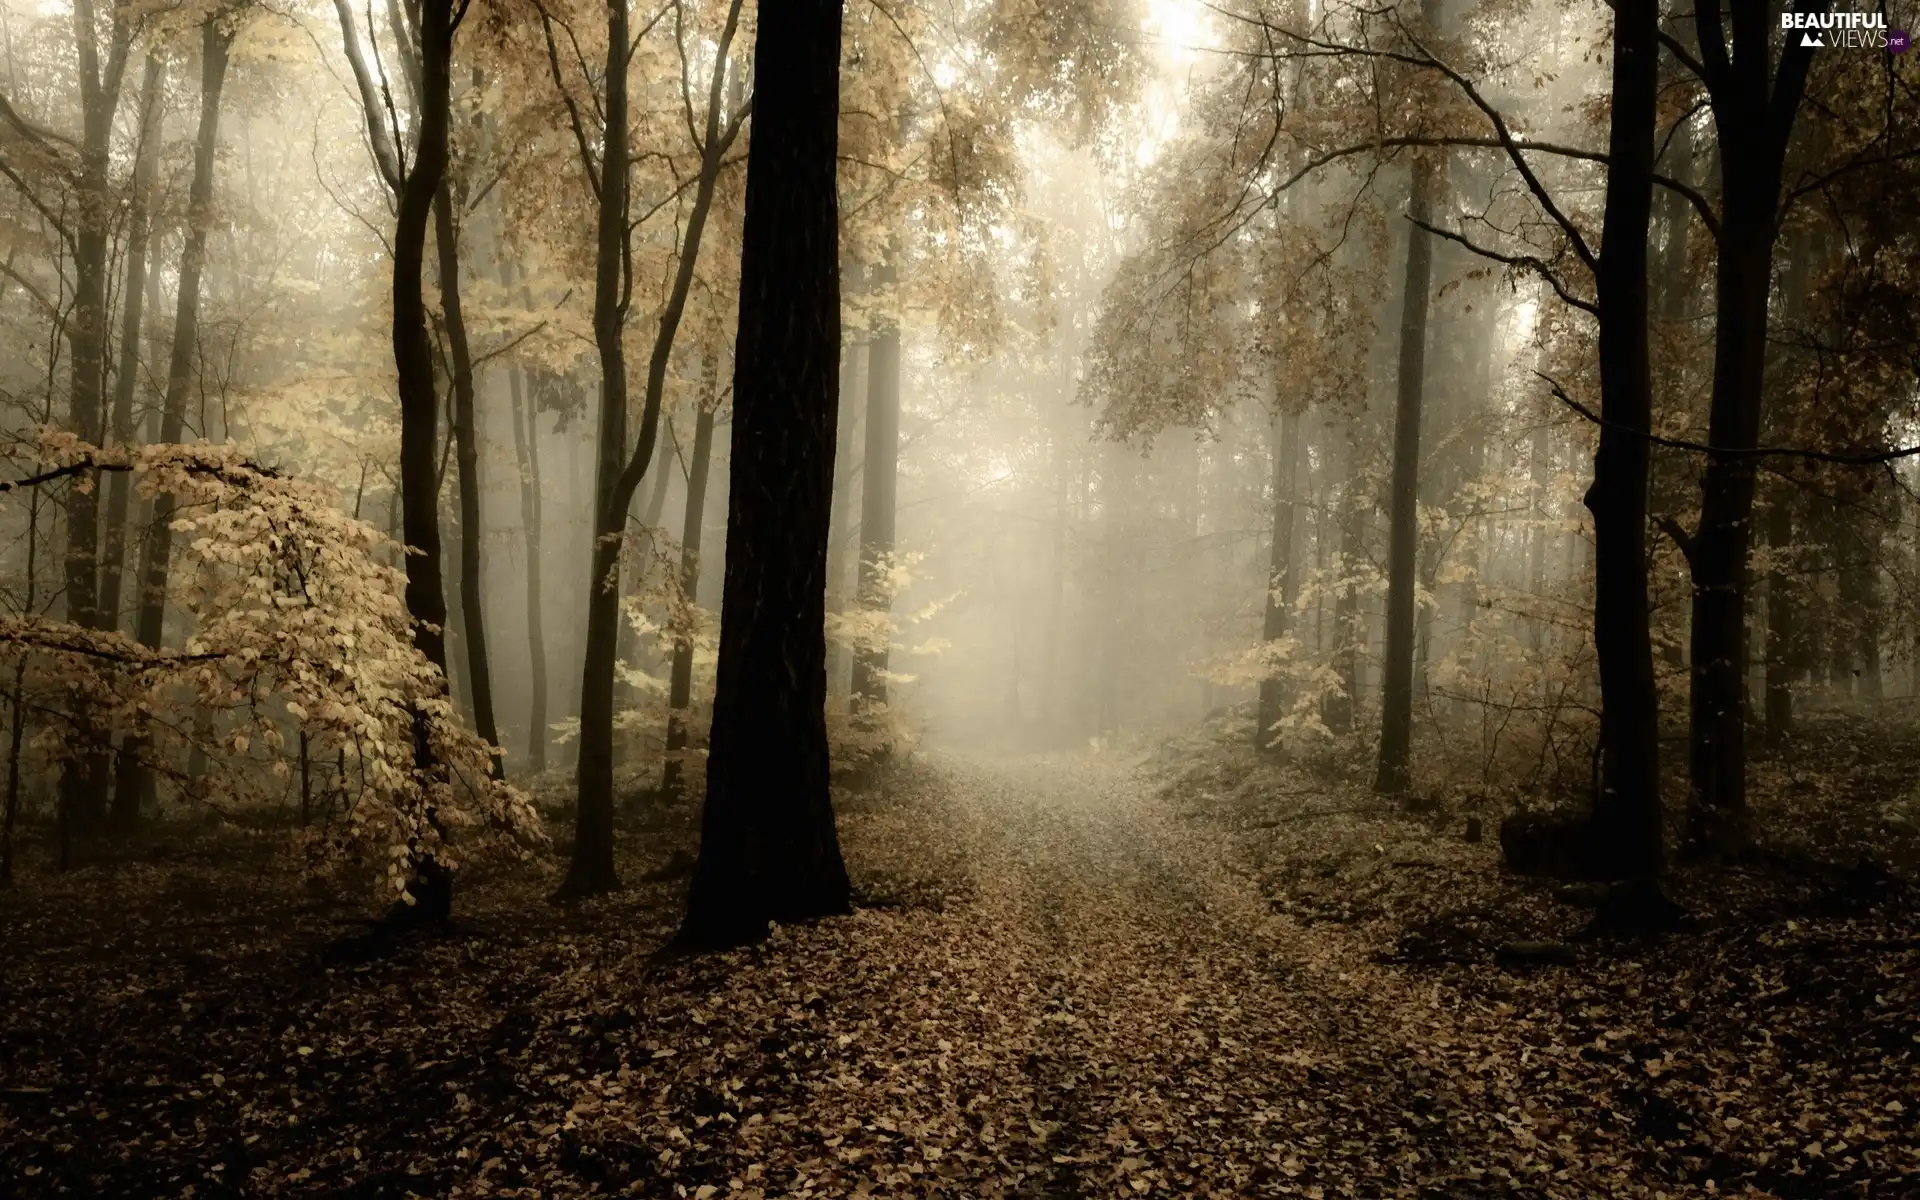 Way, morning, viewes, forest, foggy, trees, Leaf